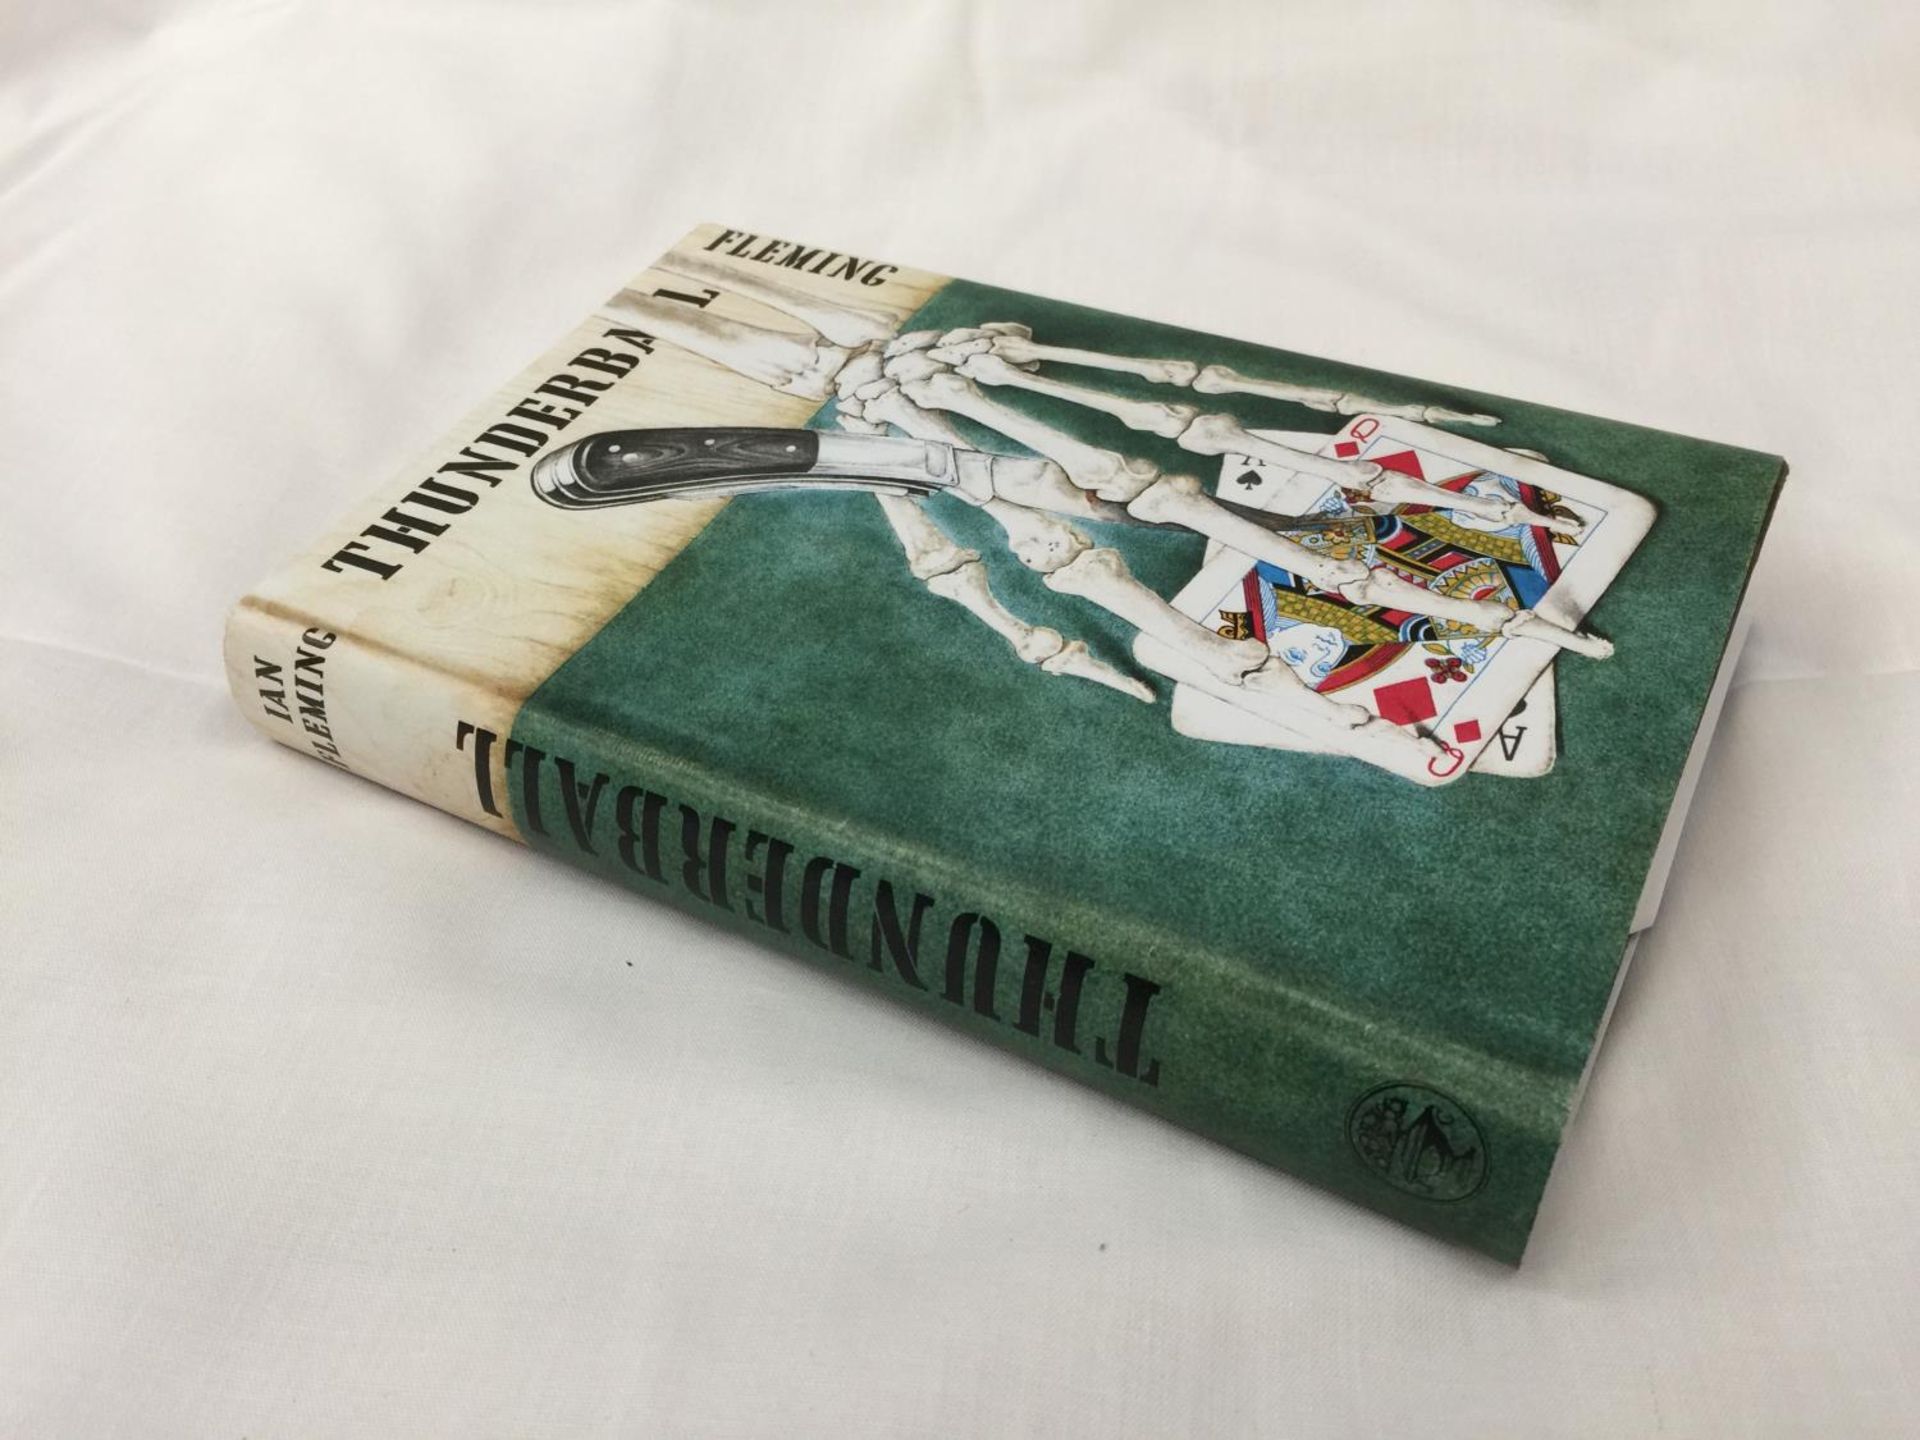 A FIRST EDITION JAMES BOND NOVEL - THUNDERBALL BY IAN FLEMING, HARDBACK WITH REPRINTED DUST JACKET - - Image 2 of 10